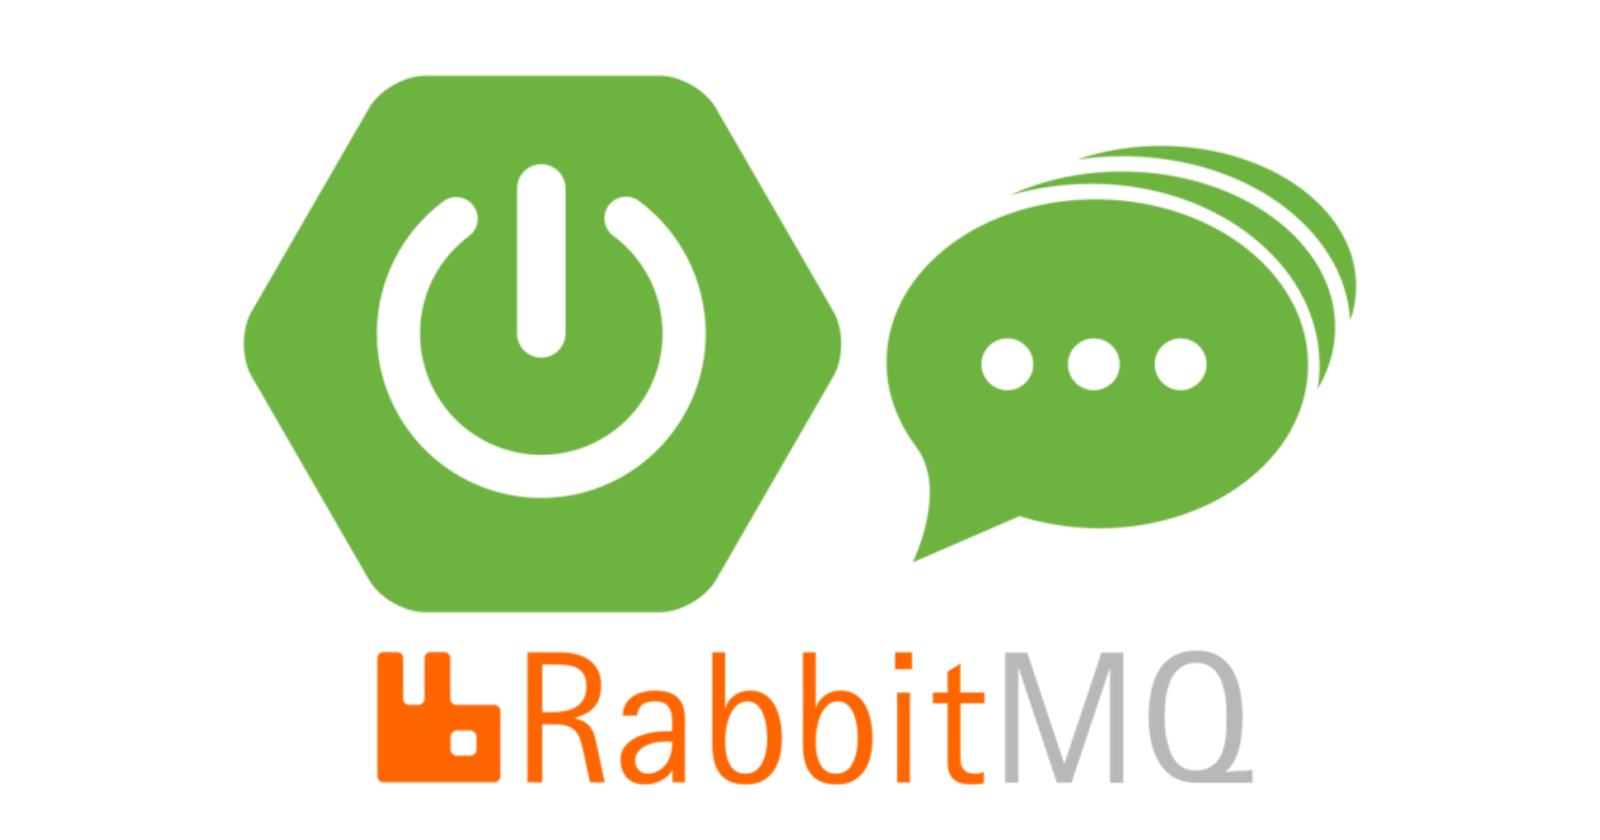 Implementing a Simple RabbitMQ Solution in Spring Boot